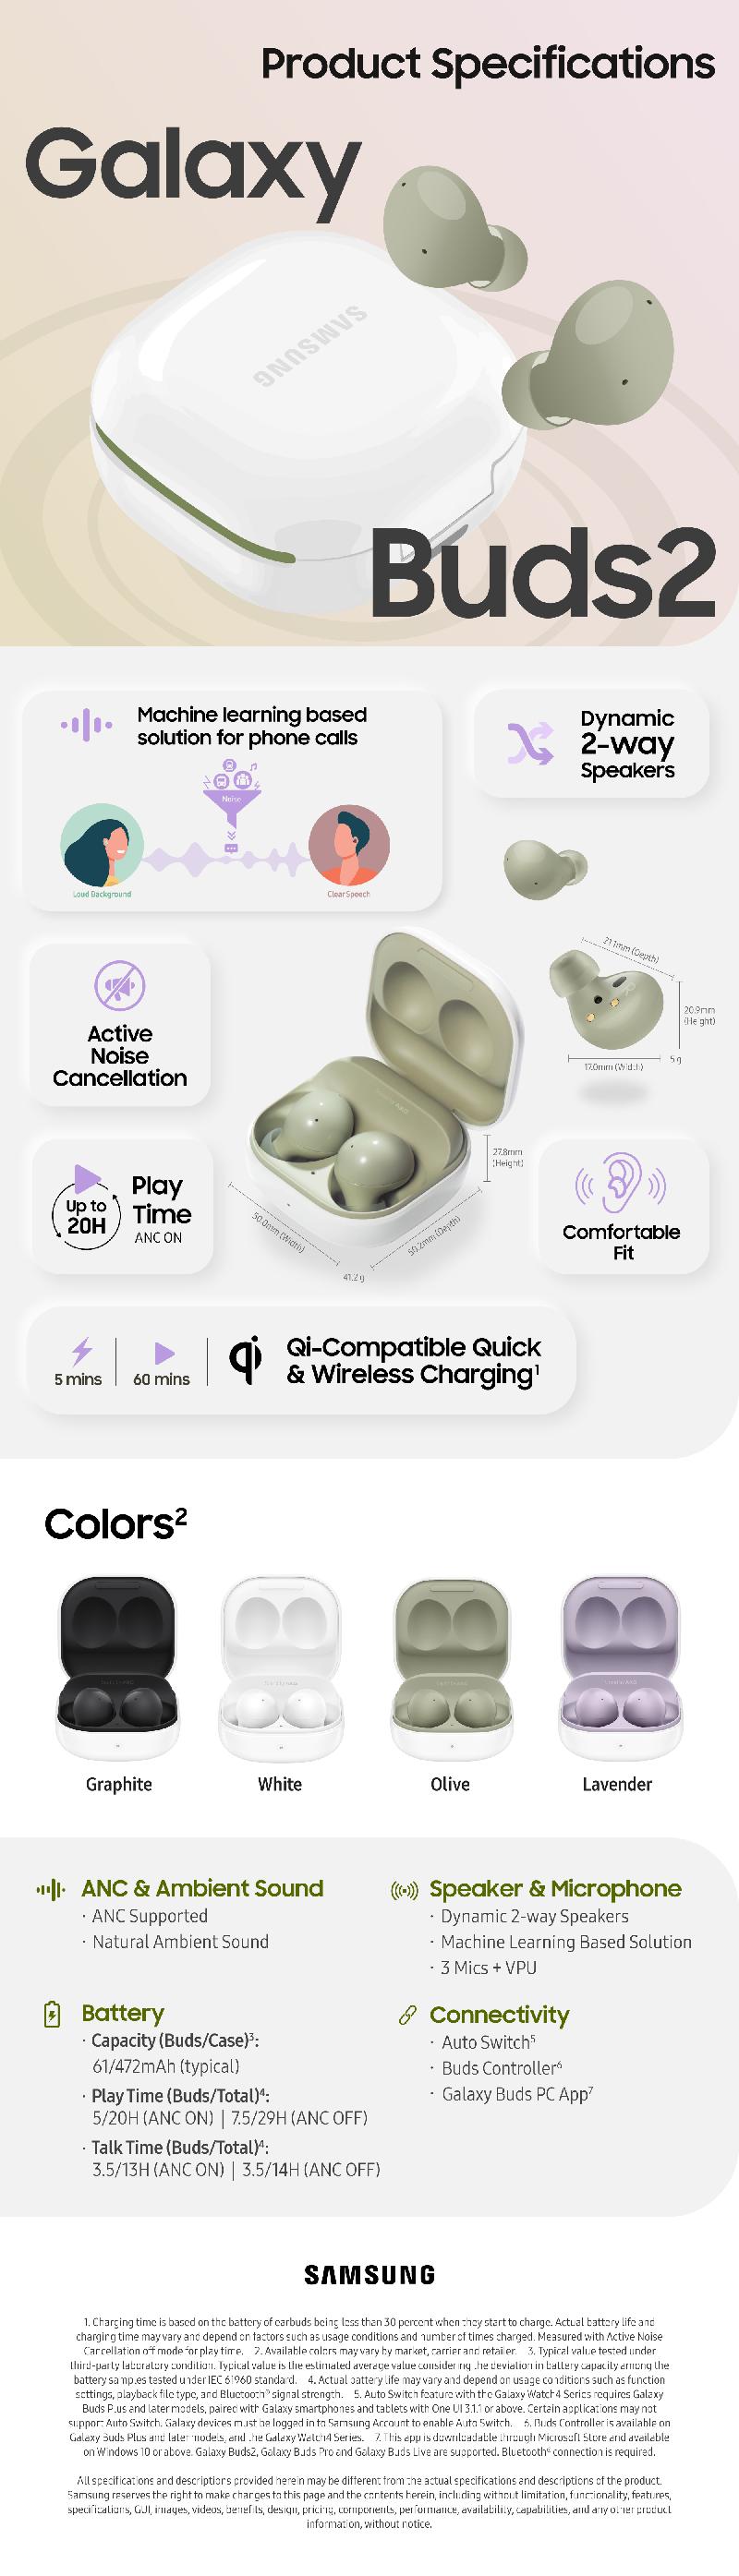 01_galaxy_buds2_product_specifications-3.jpg